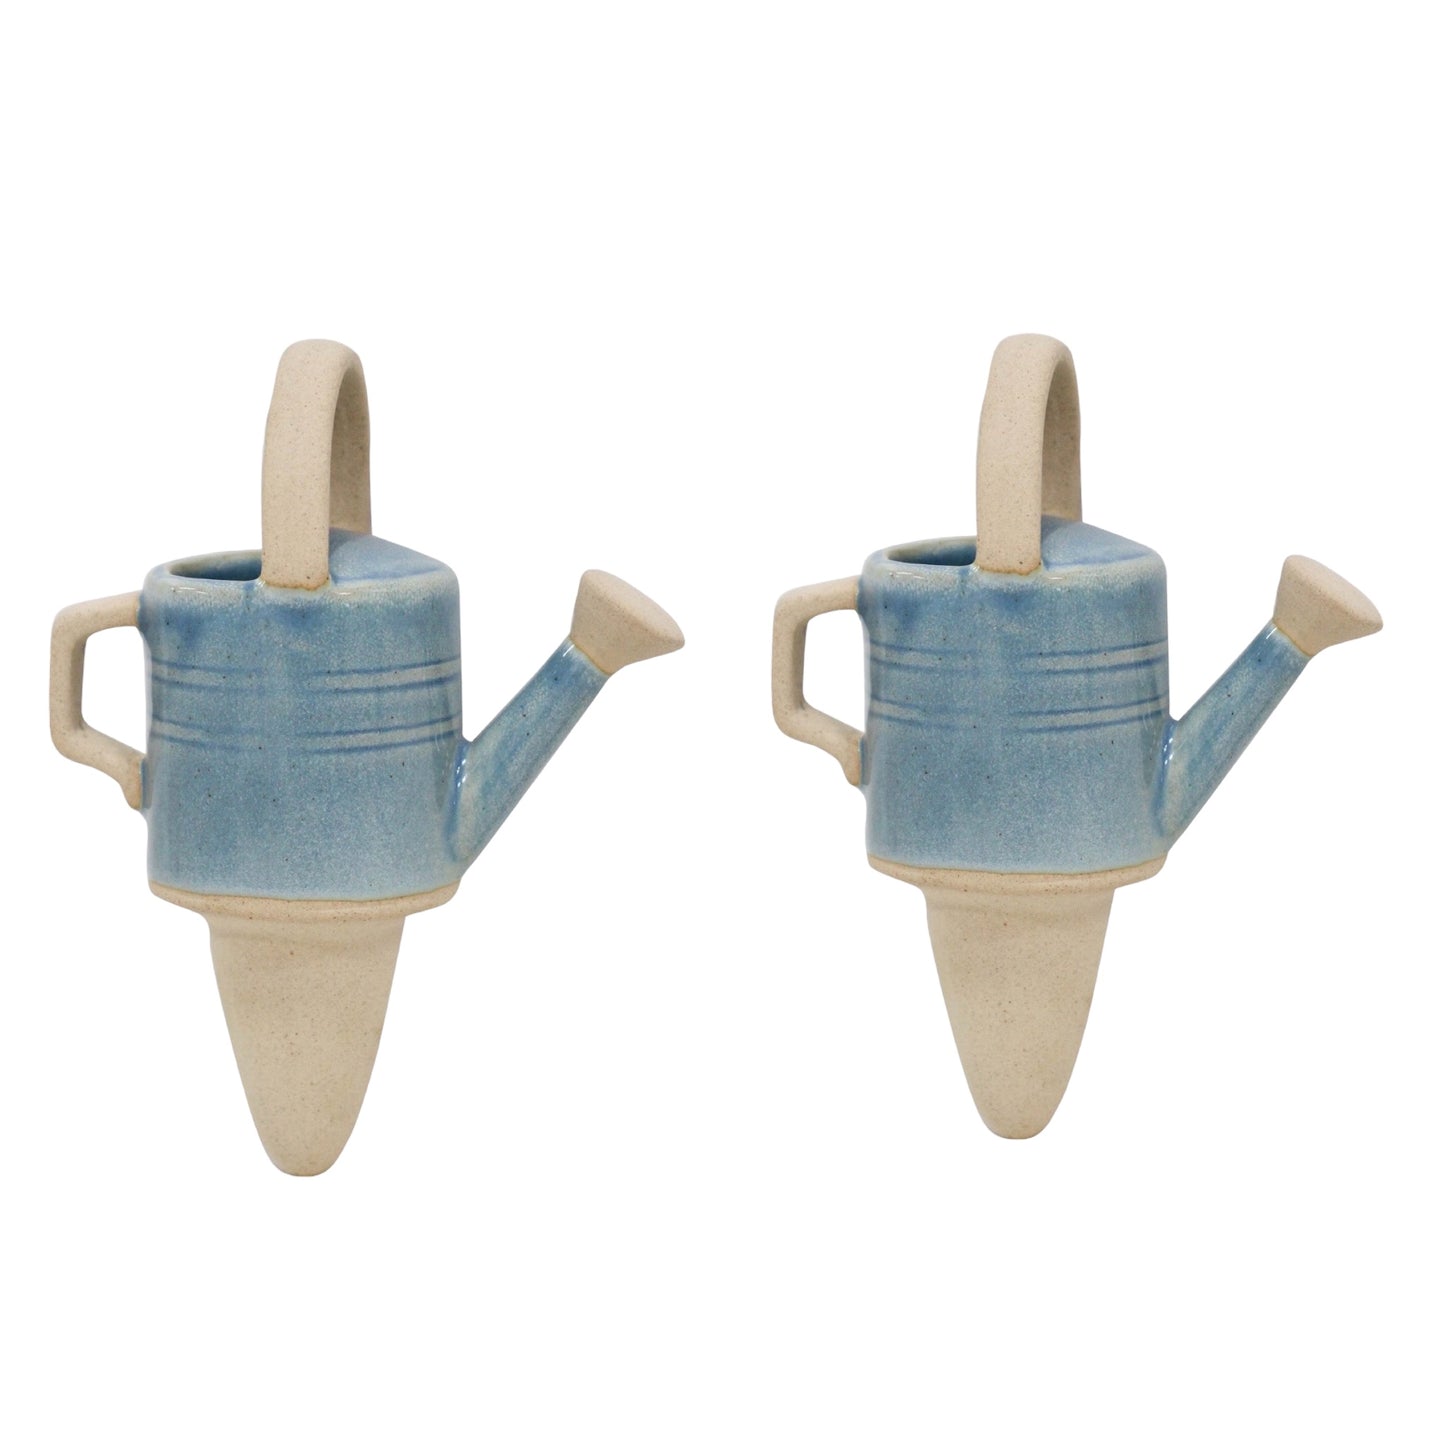 Water Spike Watering Can Set of 2